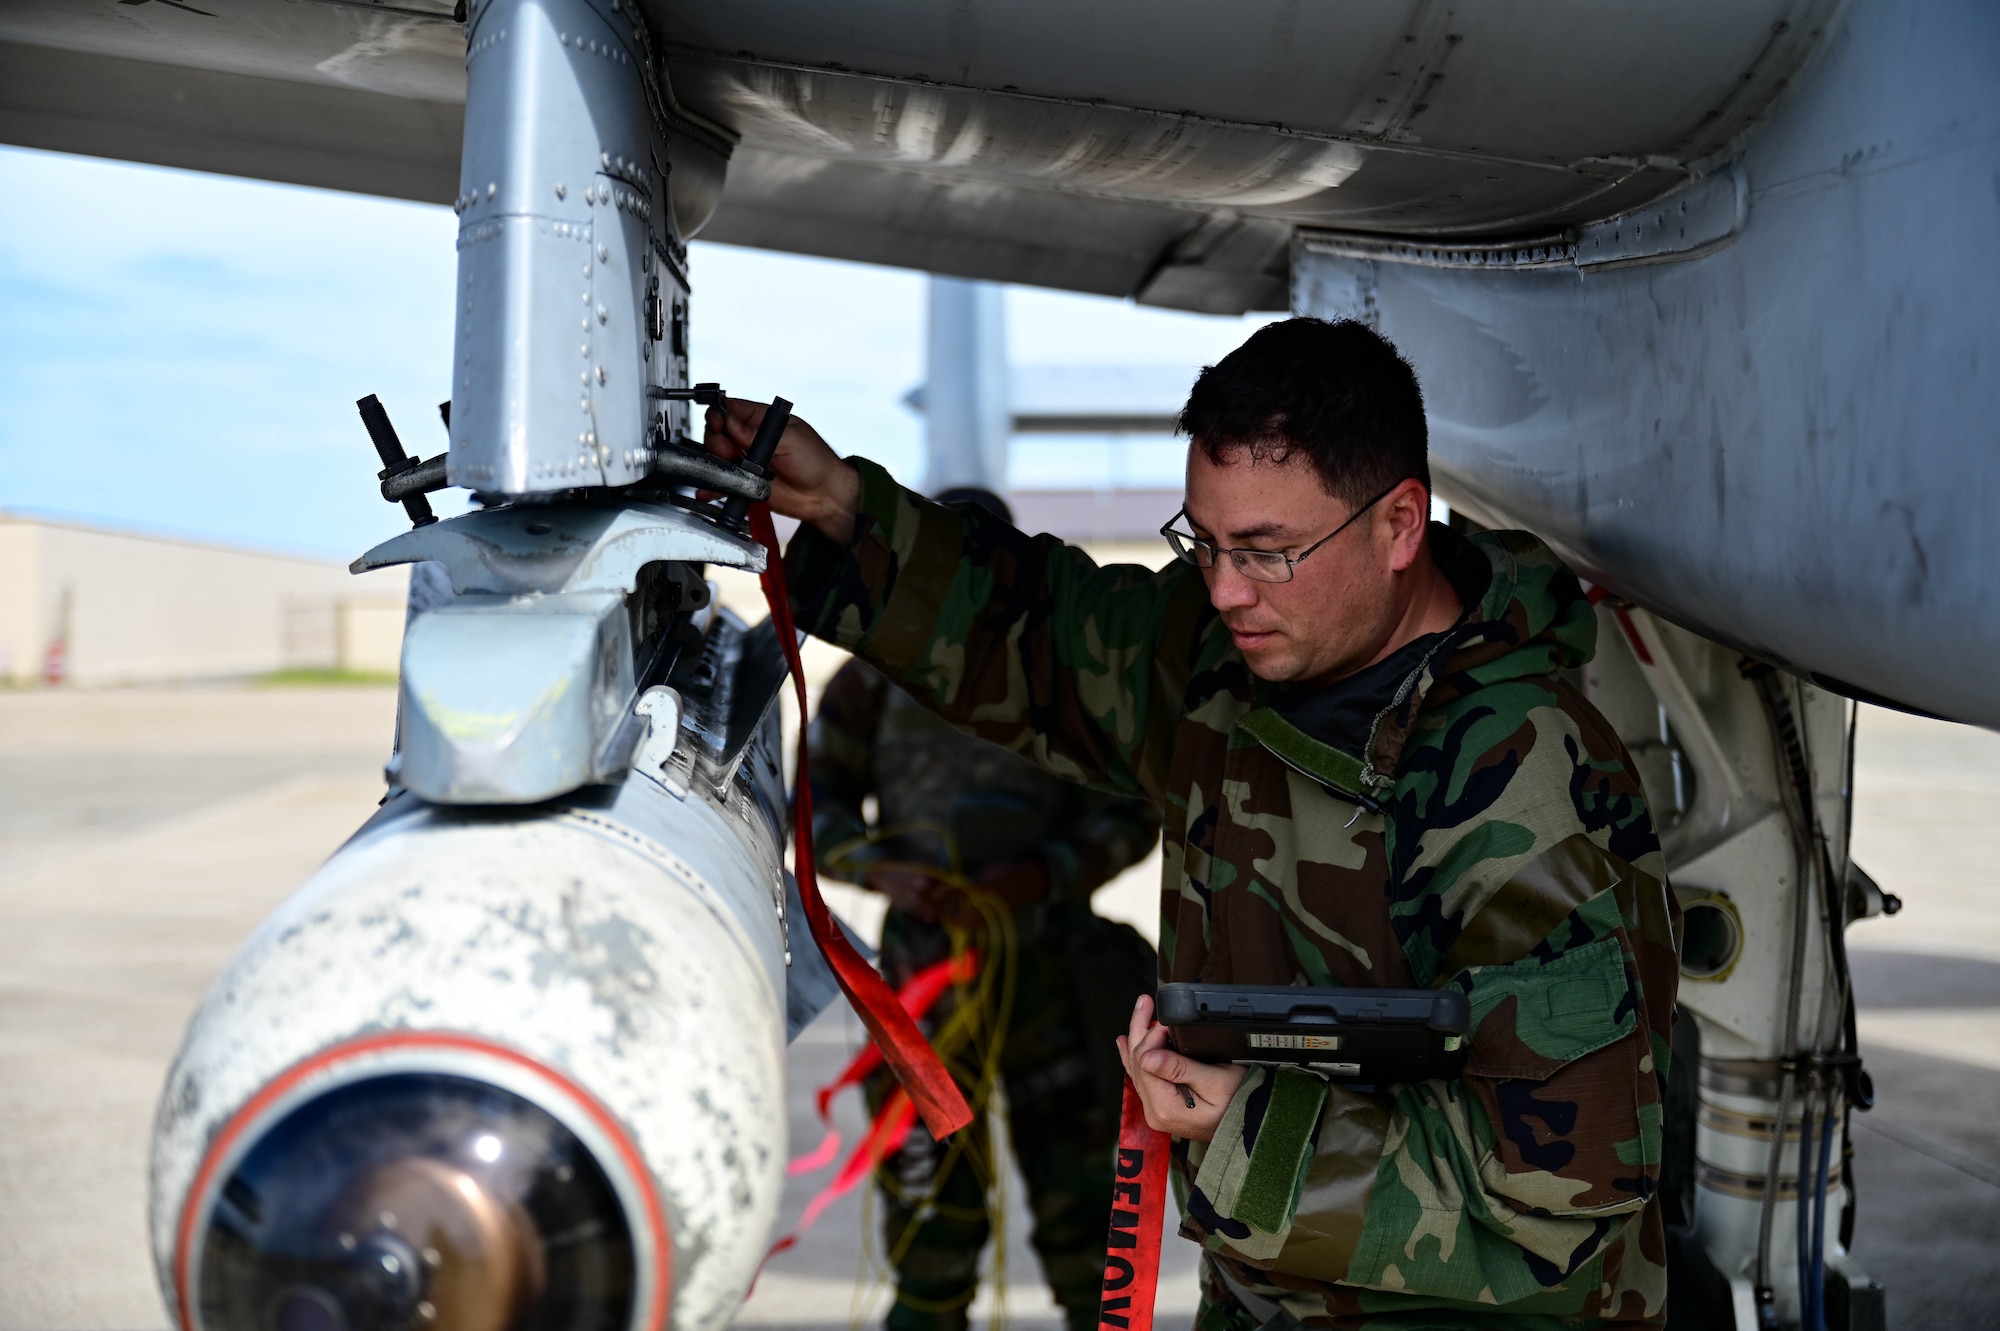 Airman under aircraft attaching red tag.